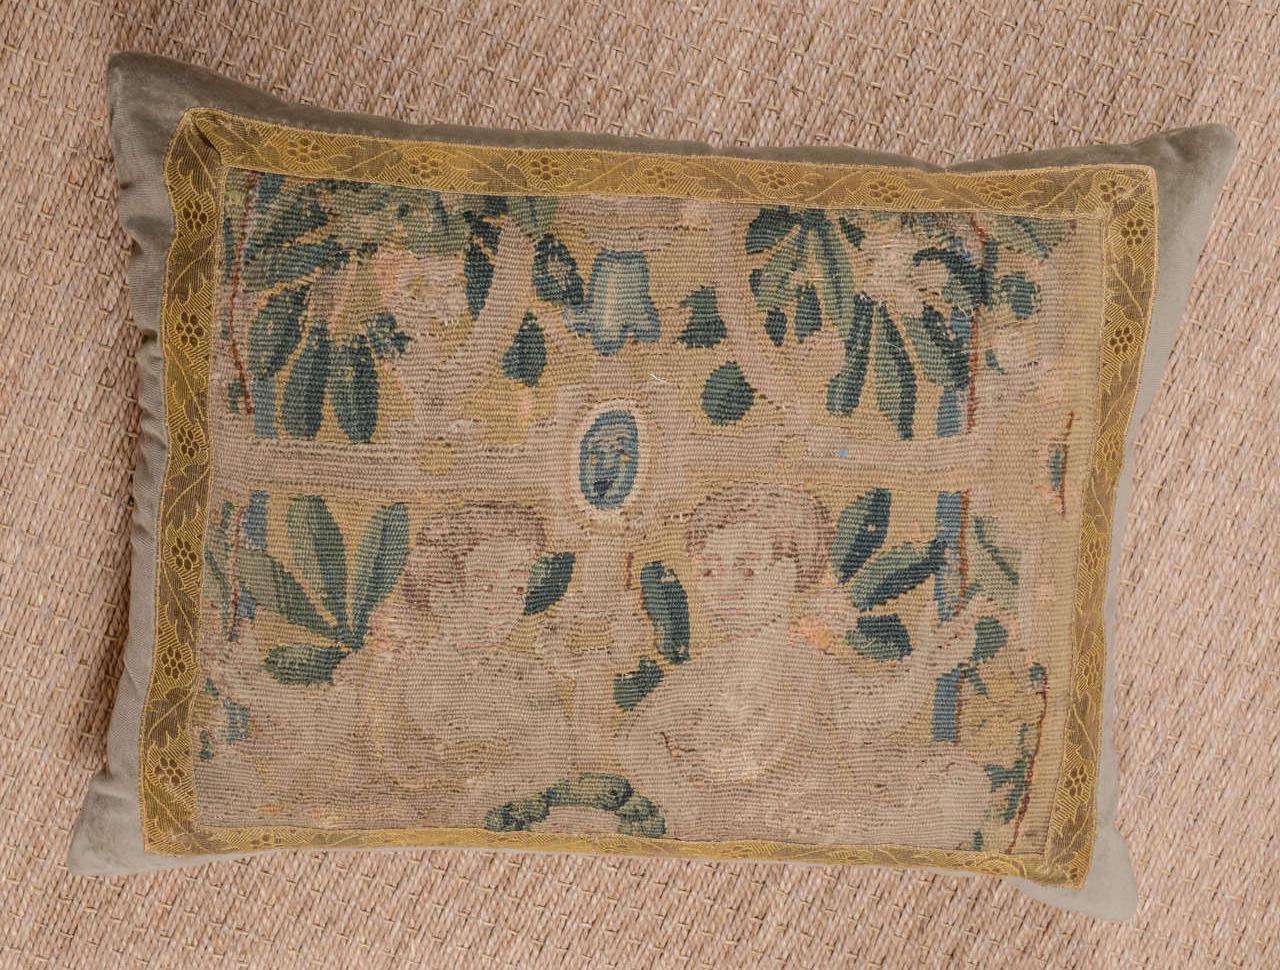 17th Century tapestry fragment pillow constructed with 100% cotton velvet. Tapestry is framed in Italian gold metallic trim. Down filled.